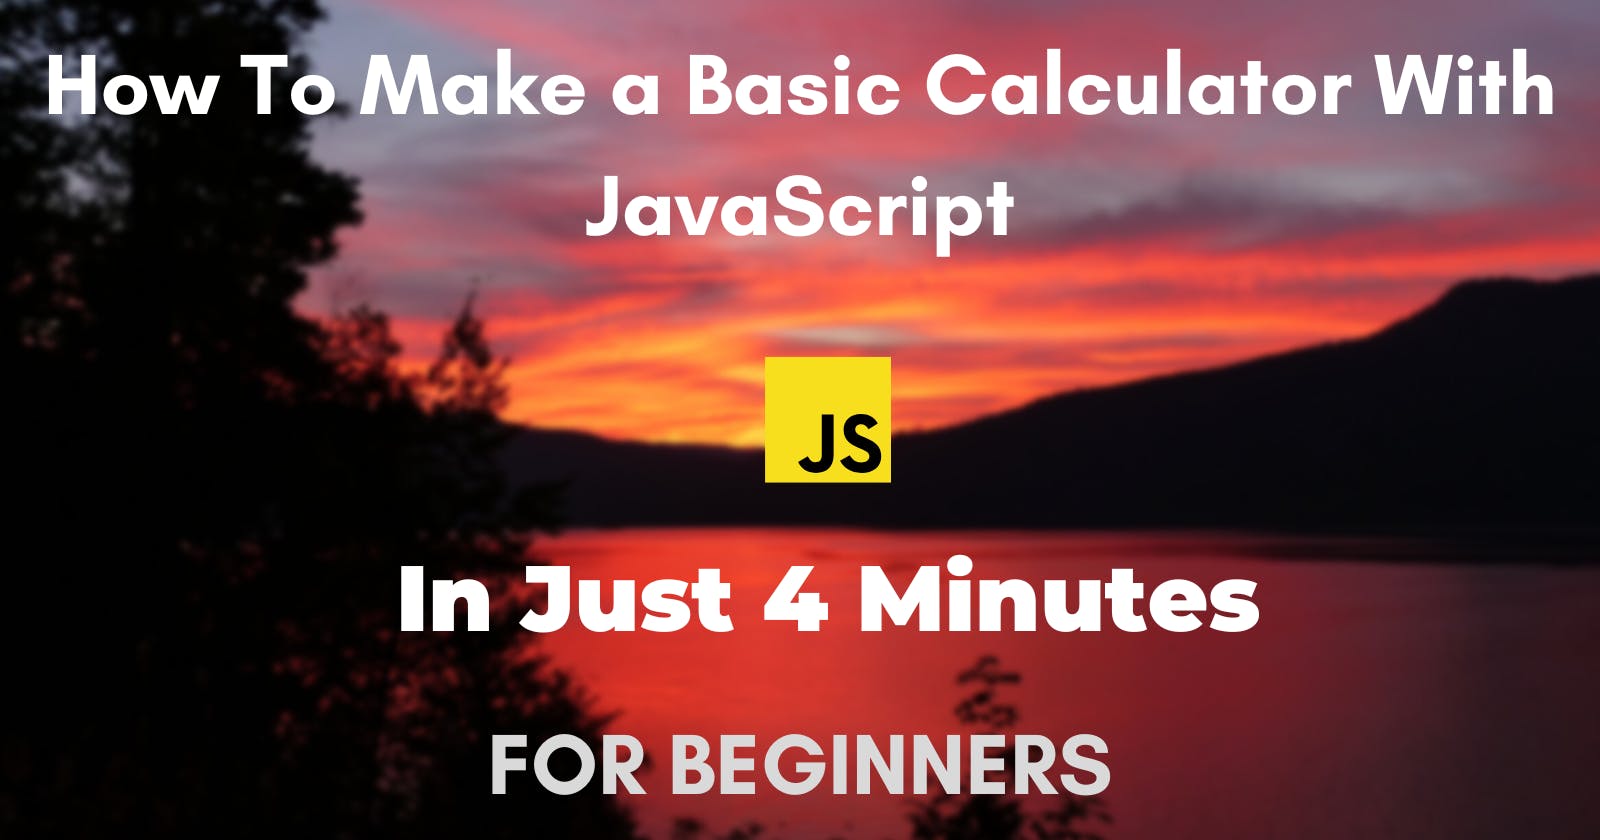 Let's make a Basic Calculator with JS in 4 minutes